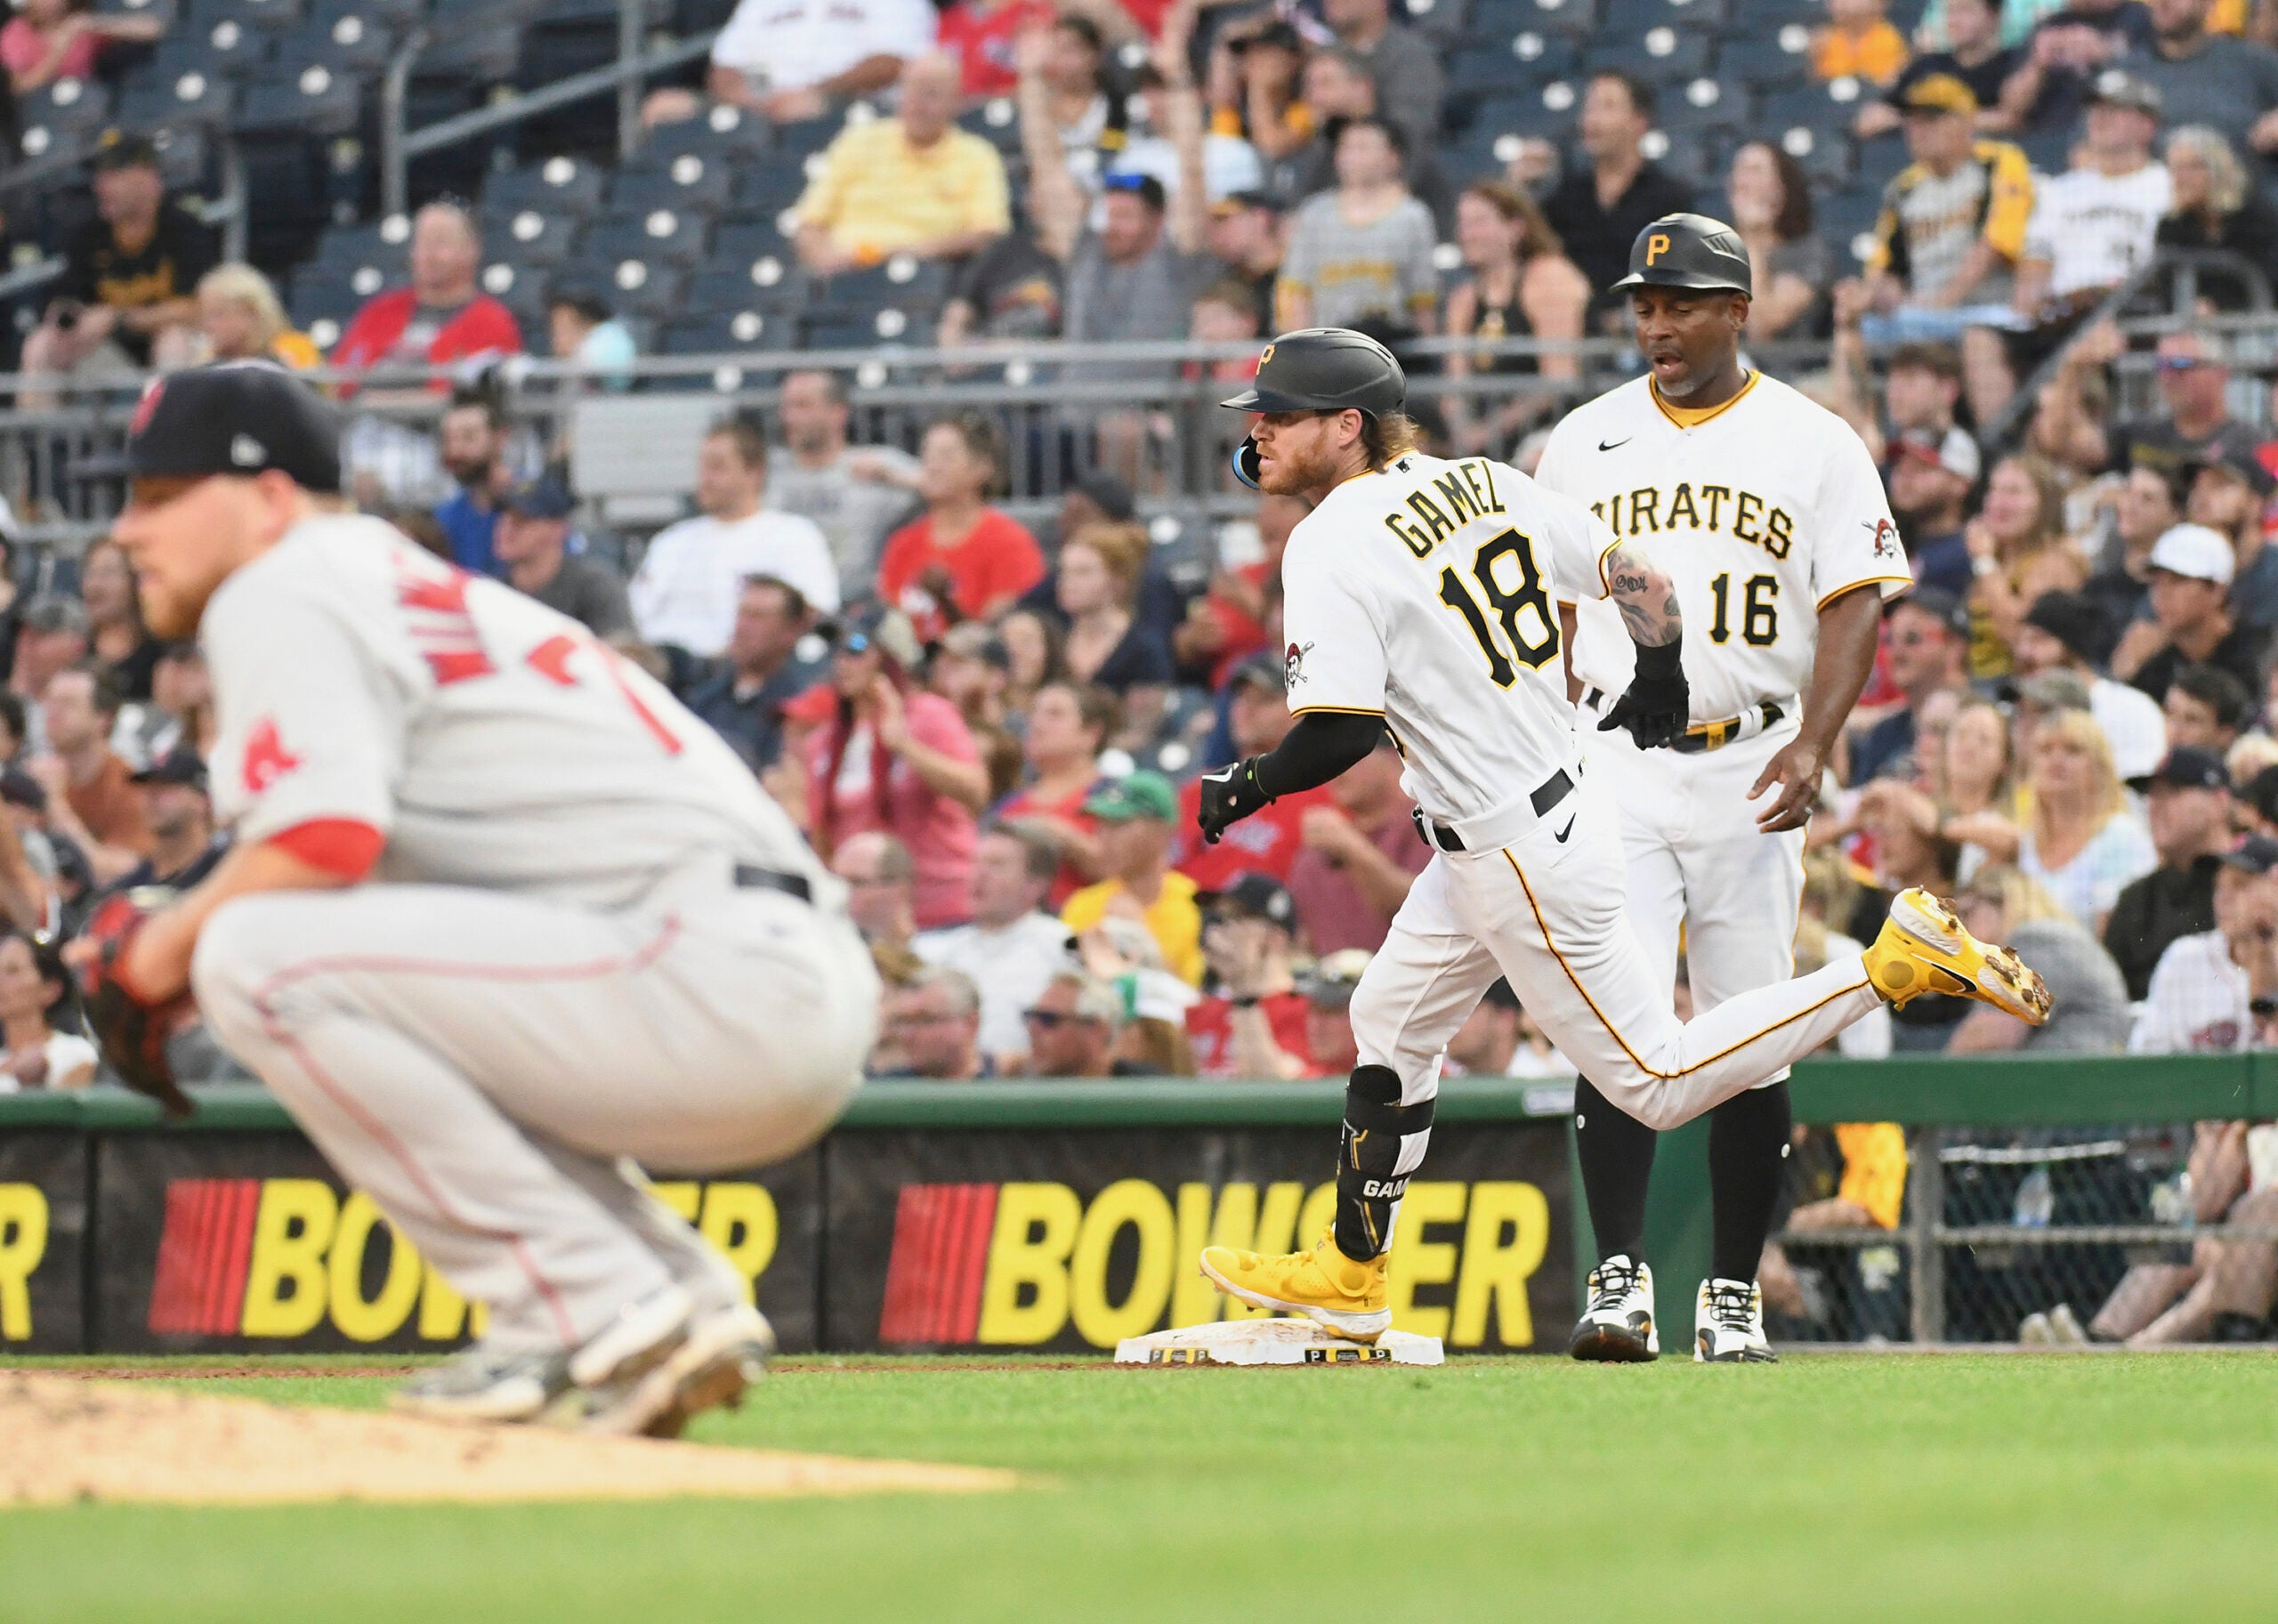 Josh Winckowski crouches as Pittsburgh's Ben Gamel rounds first base in the background.